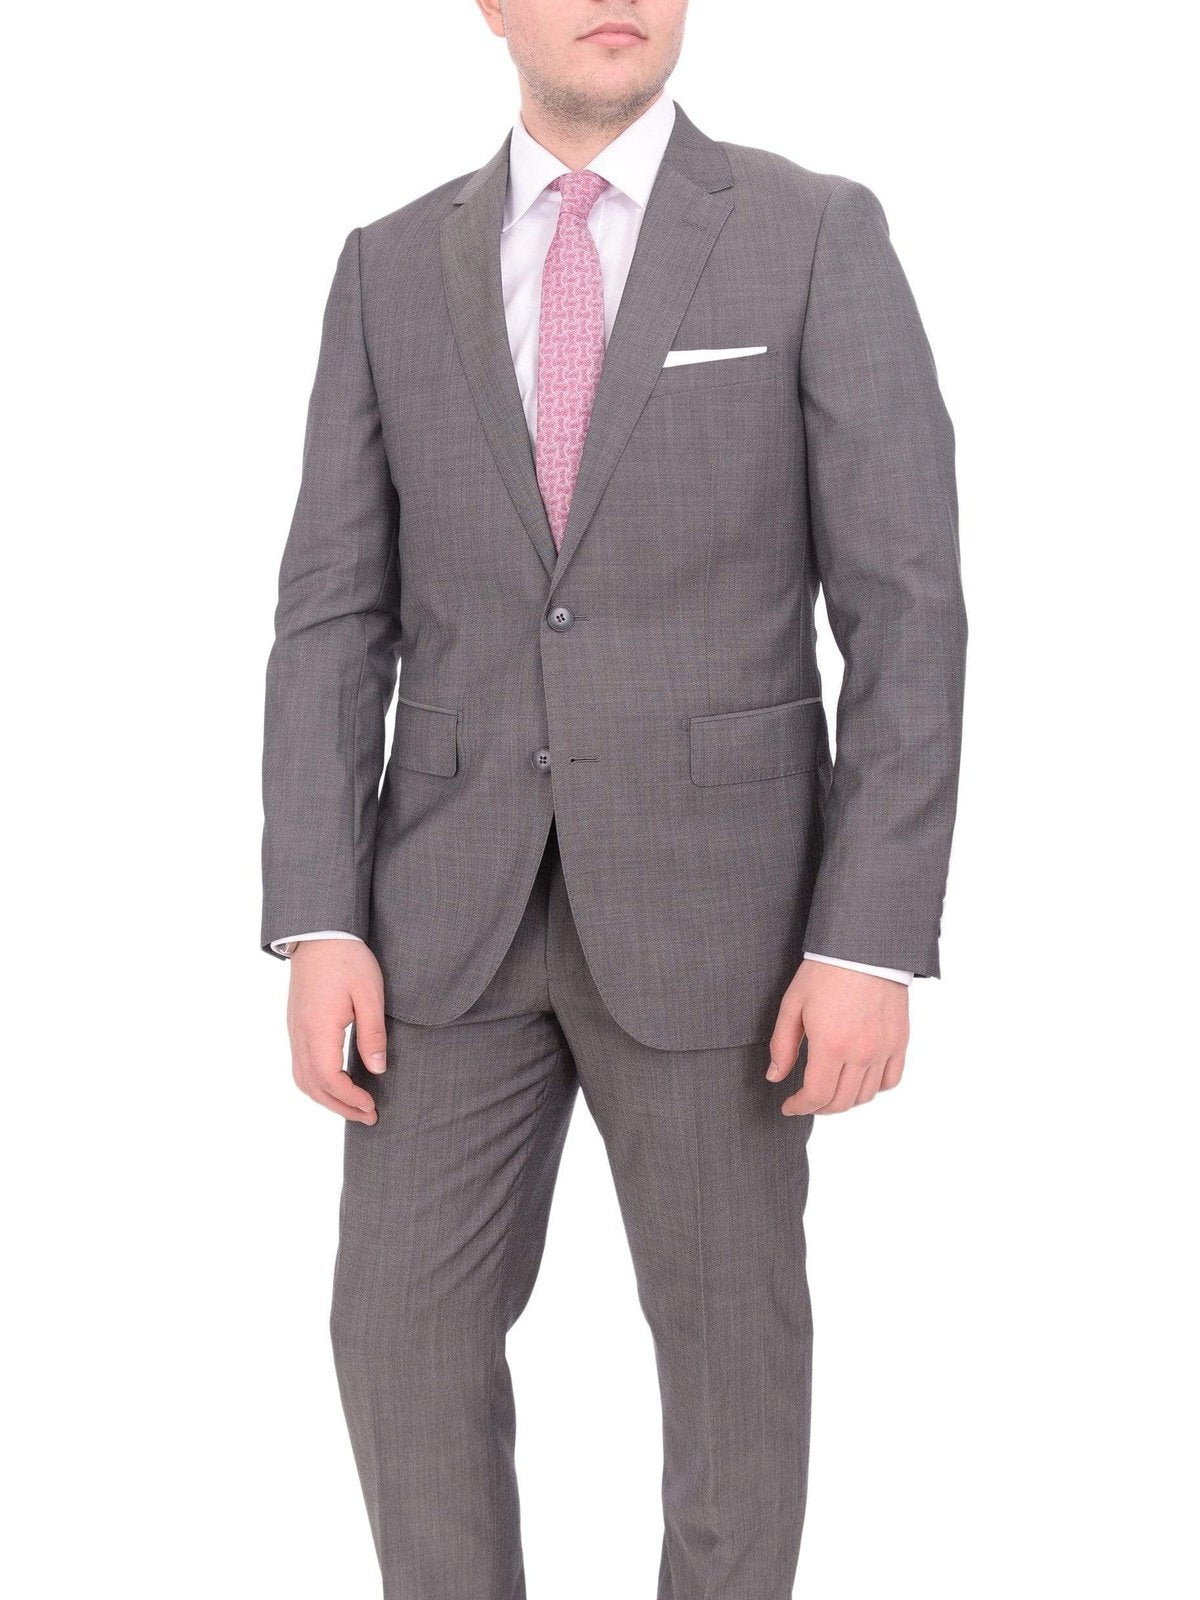 Label M TWO PIECE SUITS 40S Mens Extra Slim Fit Gray Textured Two Button Wool Blend Suit